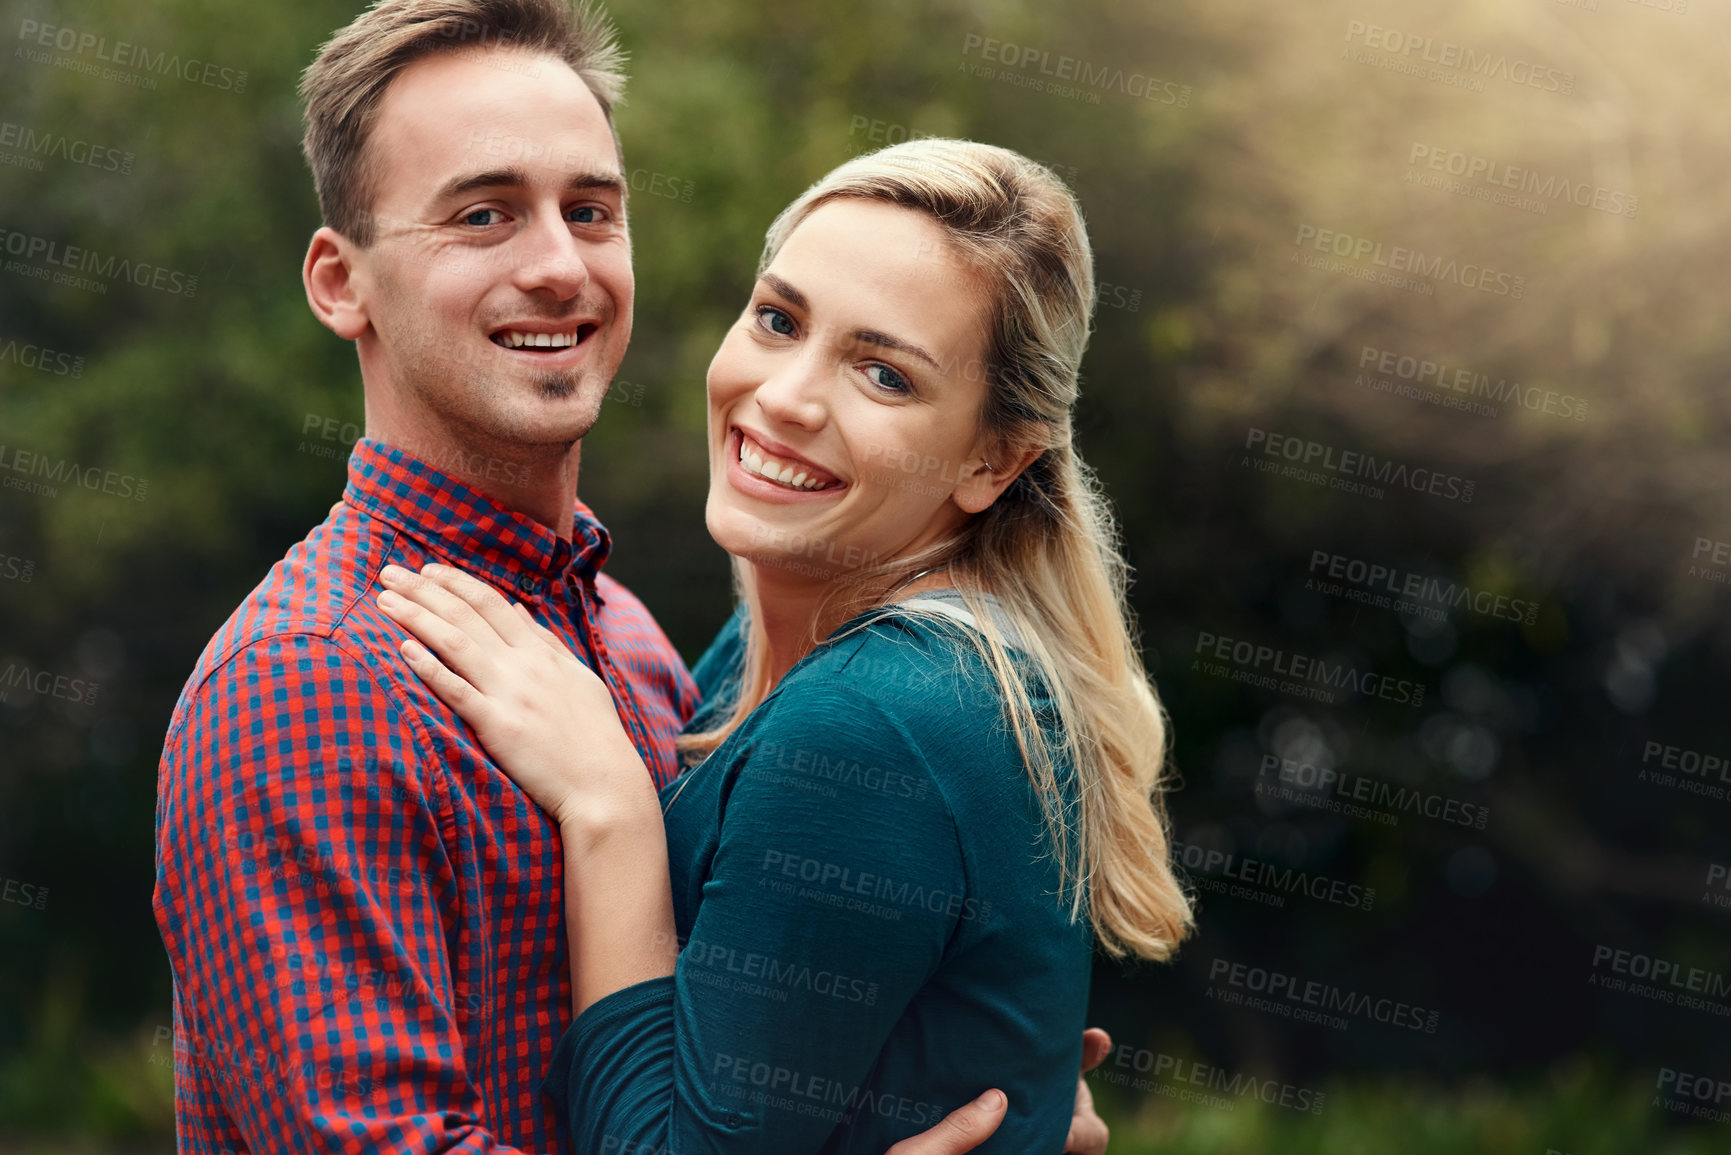 Buy stock photo Portrait of an affectionate young couple spending quality time together outdoors